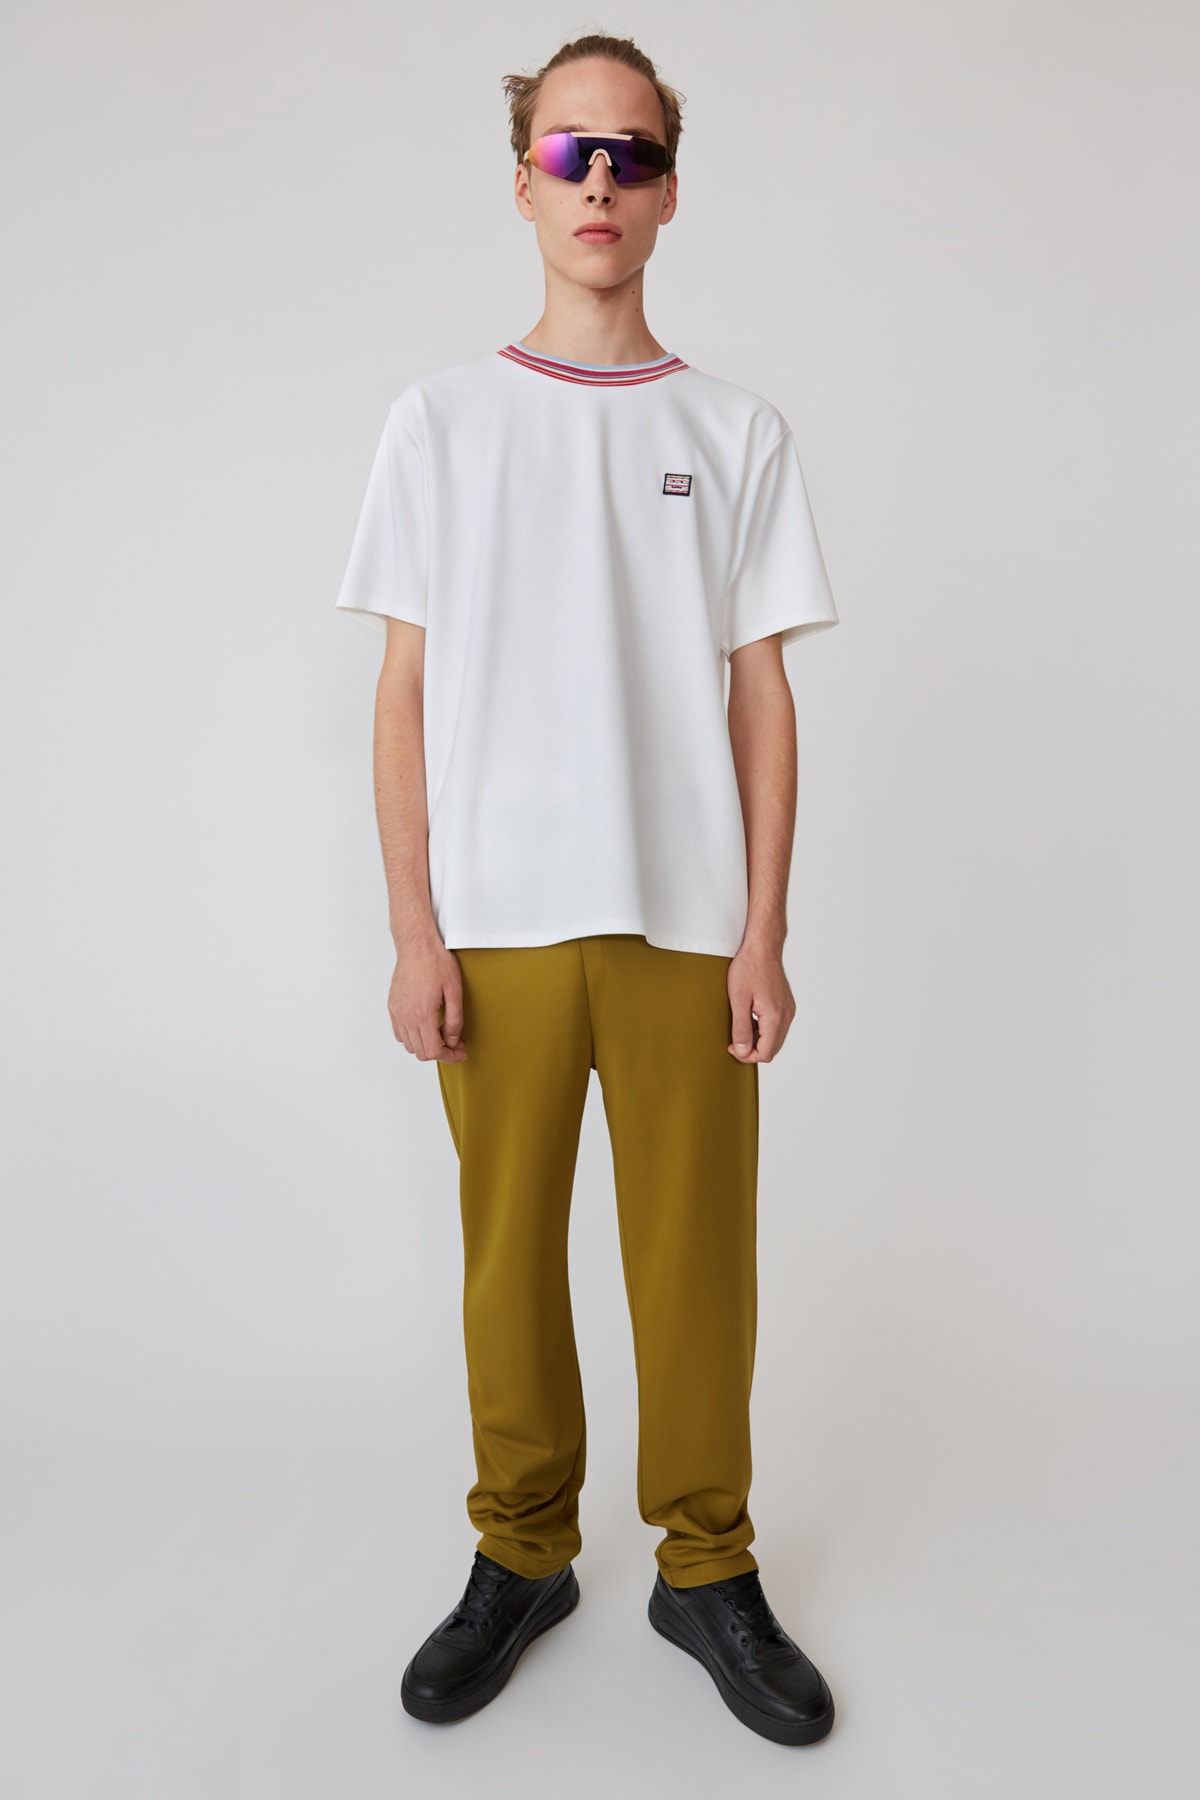 Acne Studios Spring/Summer 2019 Face Collection T-shirt White